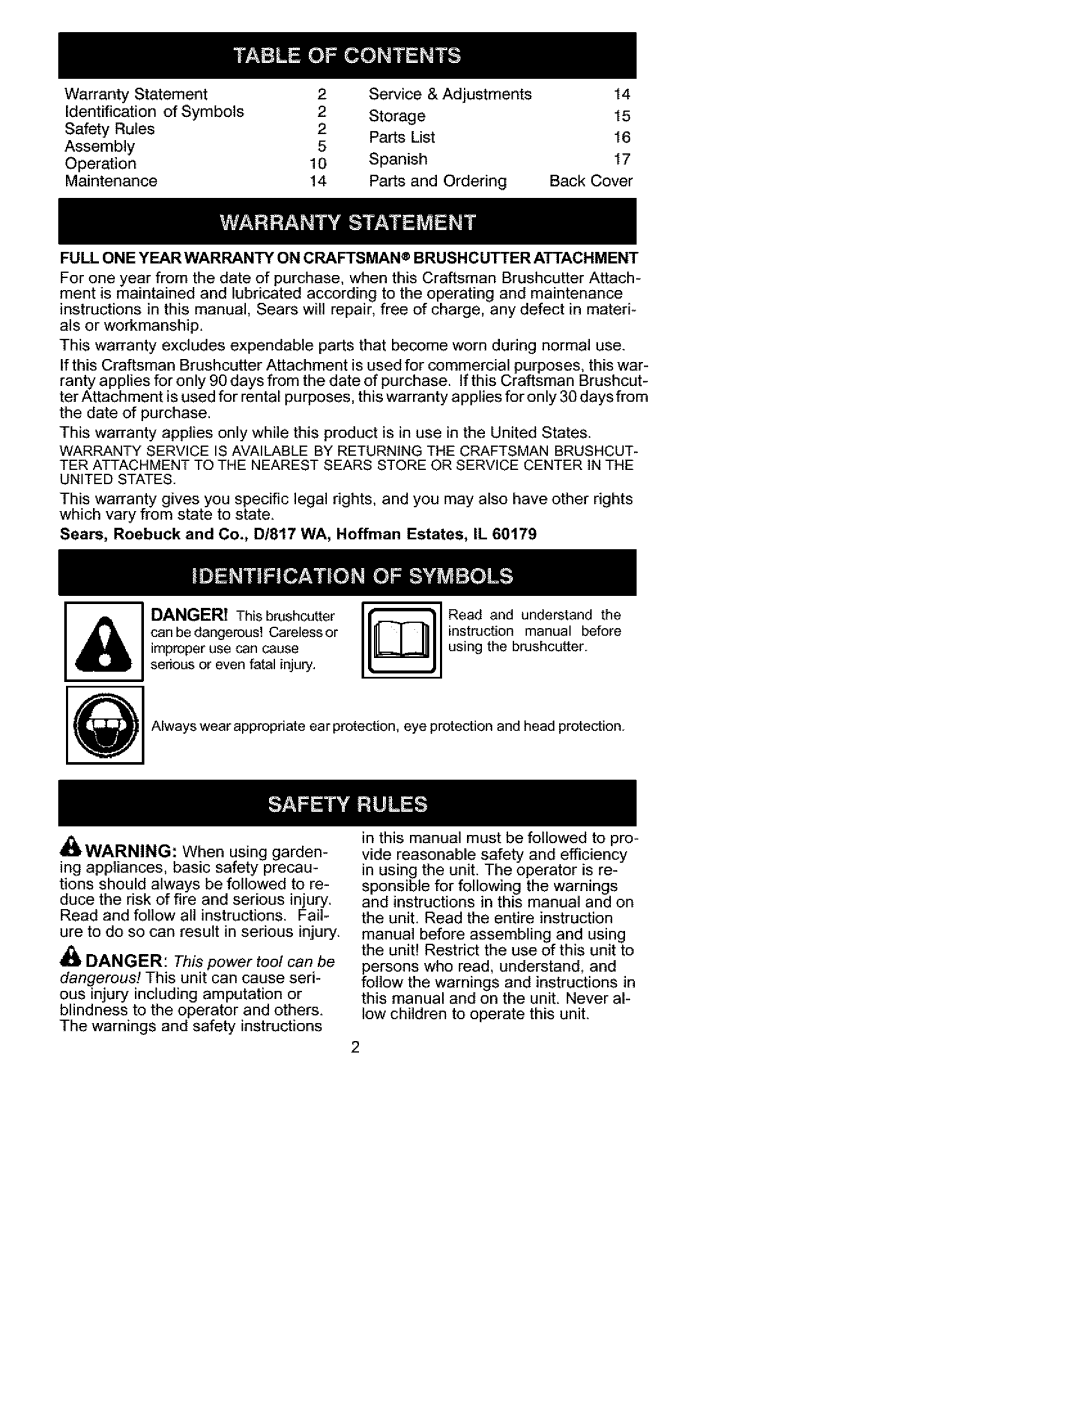 Craftsman 358.792440 instruction manual DANGER This power tool can be, Warranty Statement 